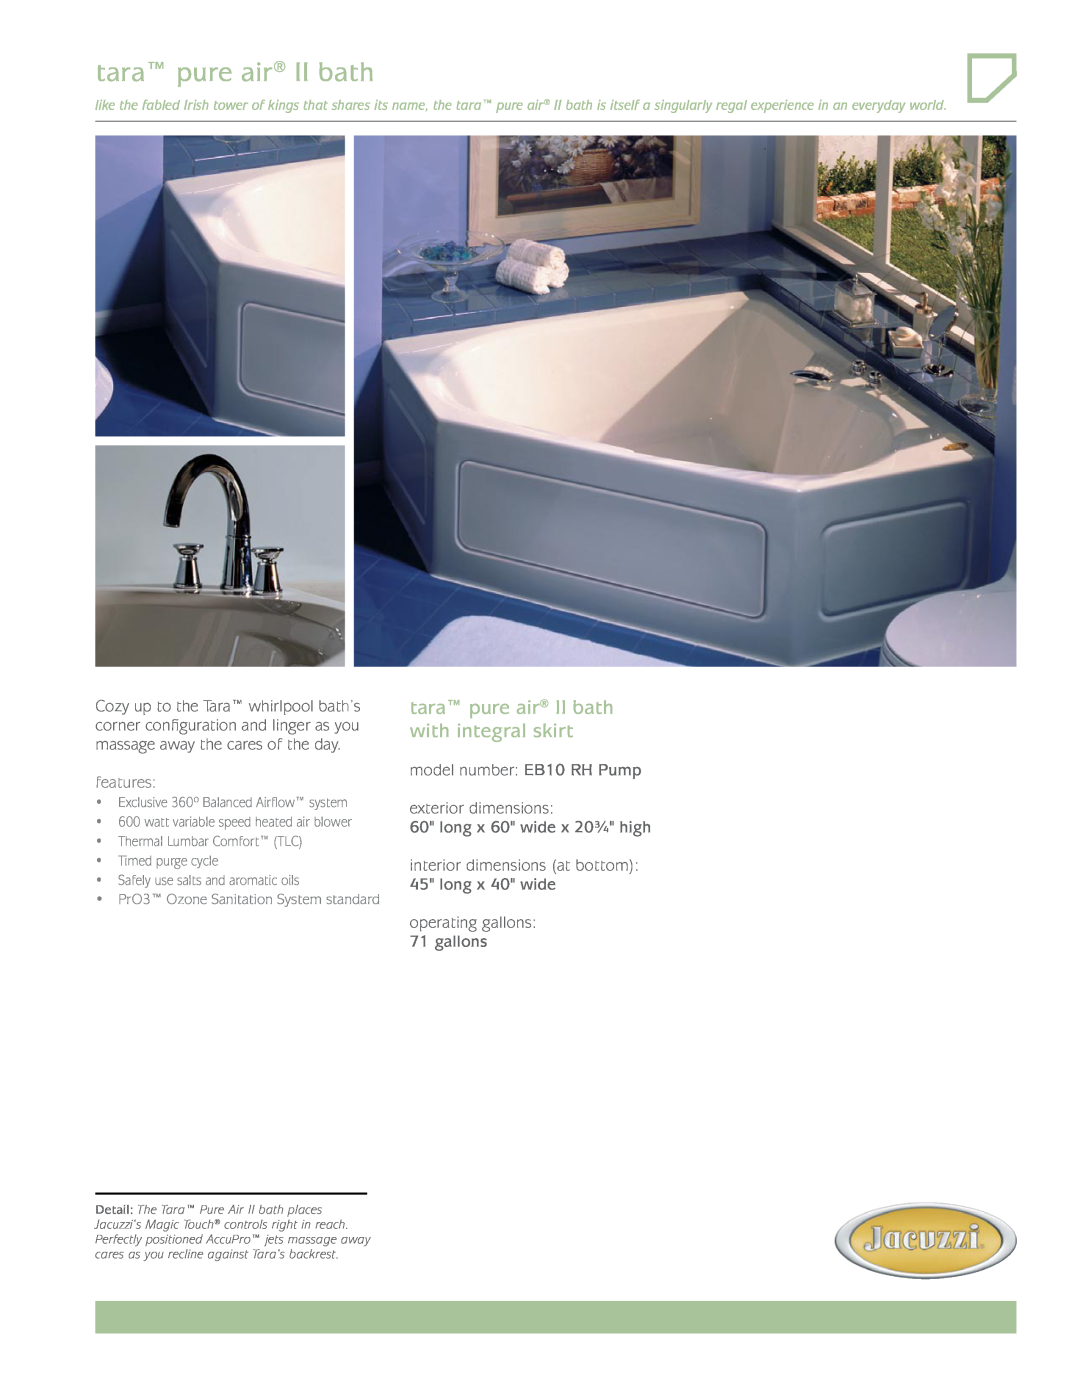 Jacuzzi EB10 dimensions tara pure air II bath with integral skirt, features, long x 60 wide x 20¾ high 